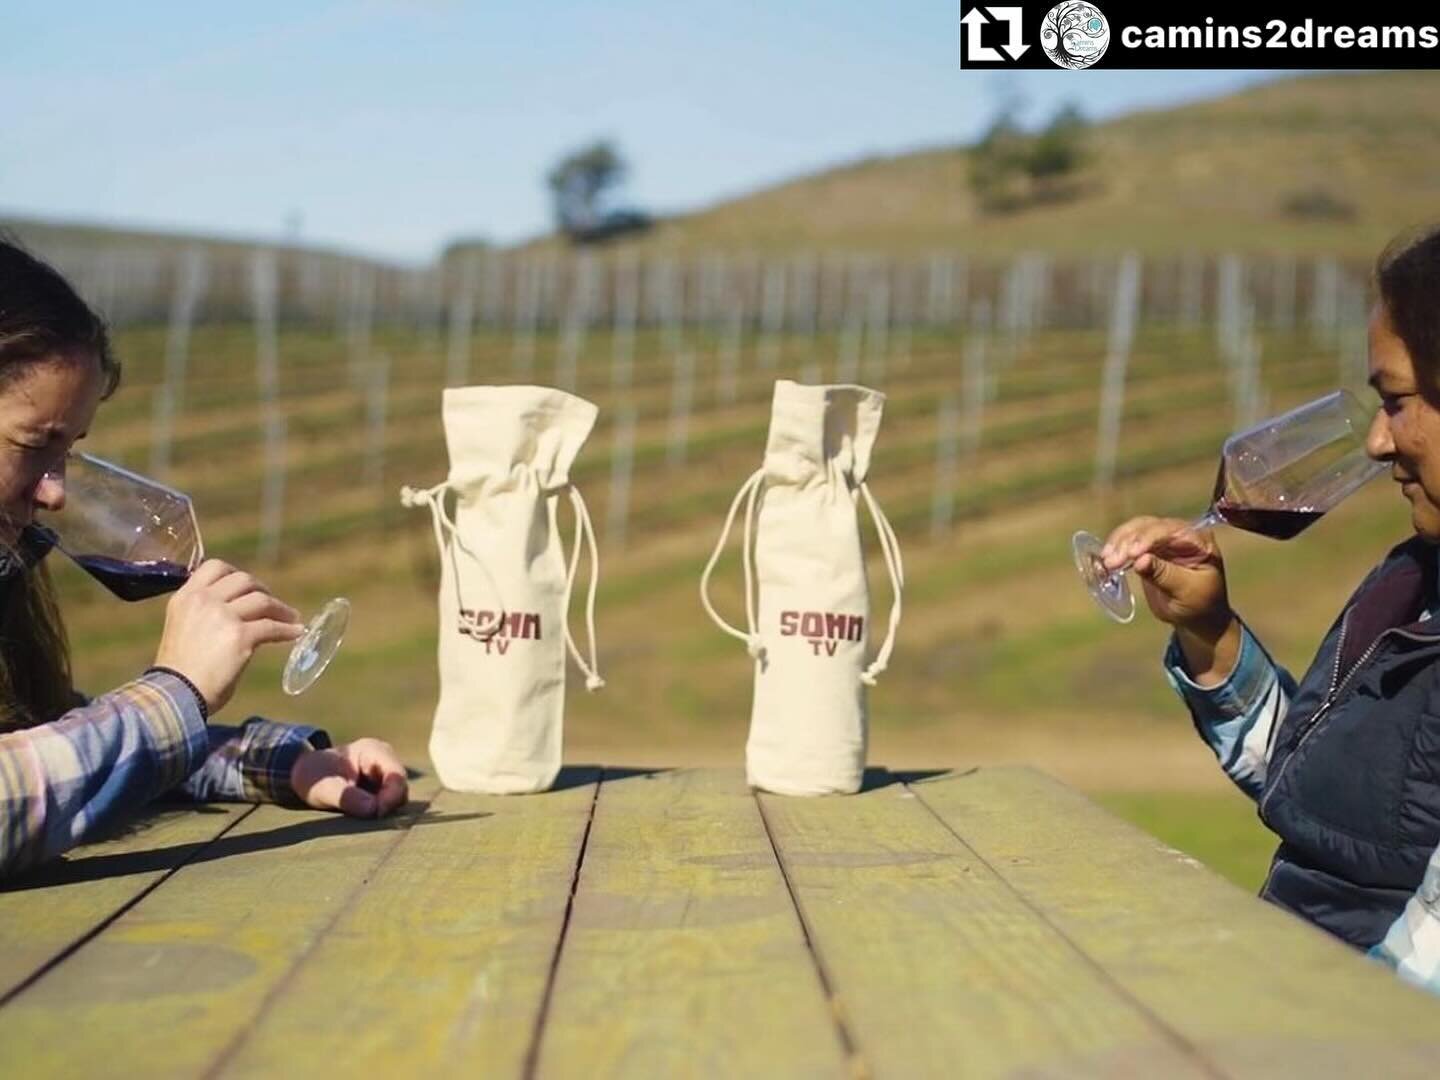 #supplierspotlight featured @thprsrv in our #winepairing program @camins2dreams 
.
&ldquo;C2D began as a lifelong dream turned passion project 💭🍷It&rsquo;s about embracing risks, stepping out of comfort zones, and believing in ourselves. From start